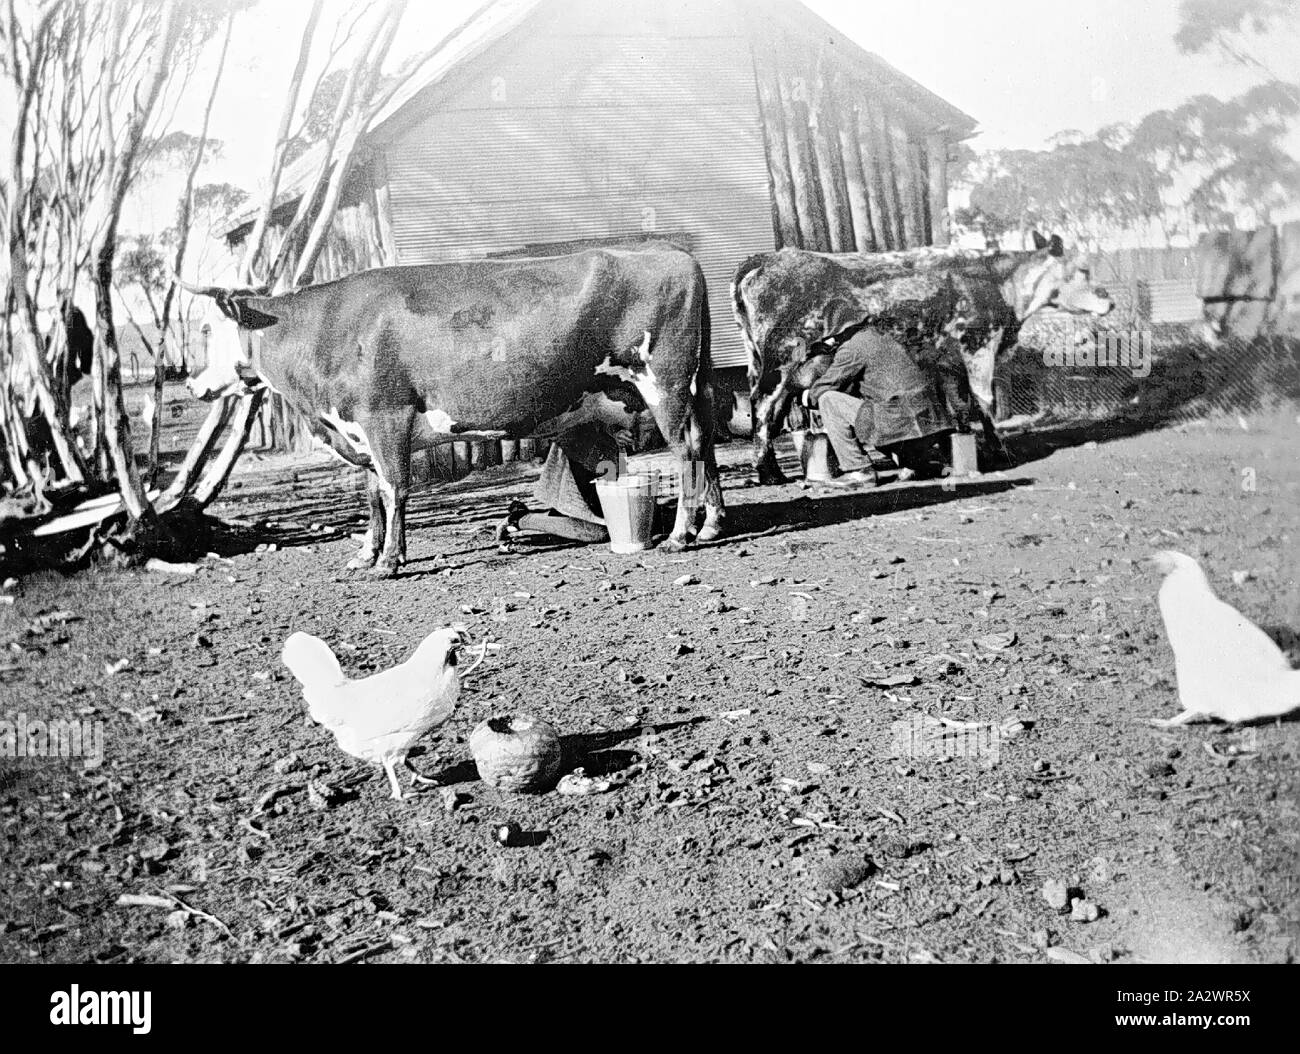 Negative - Prooinga, Victoria, circa 1925, A man and woman milking cows. There are chickens in the foreground Stock Photo